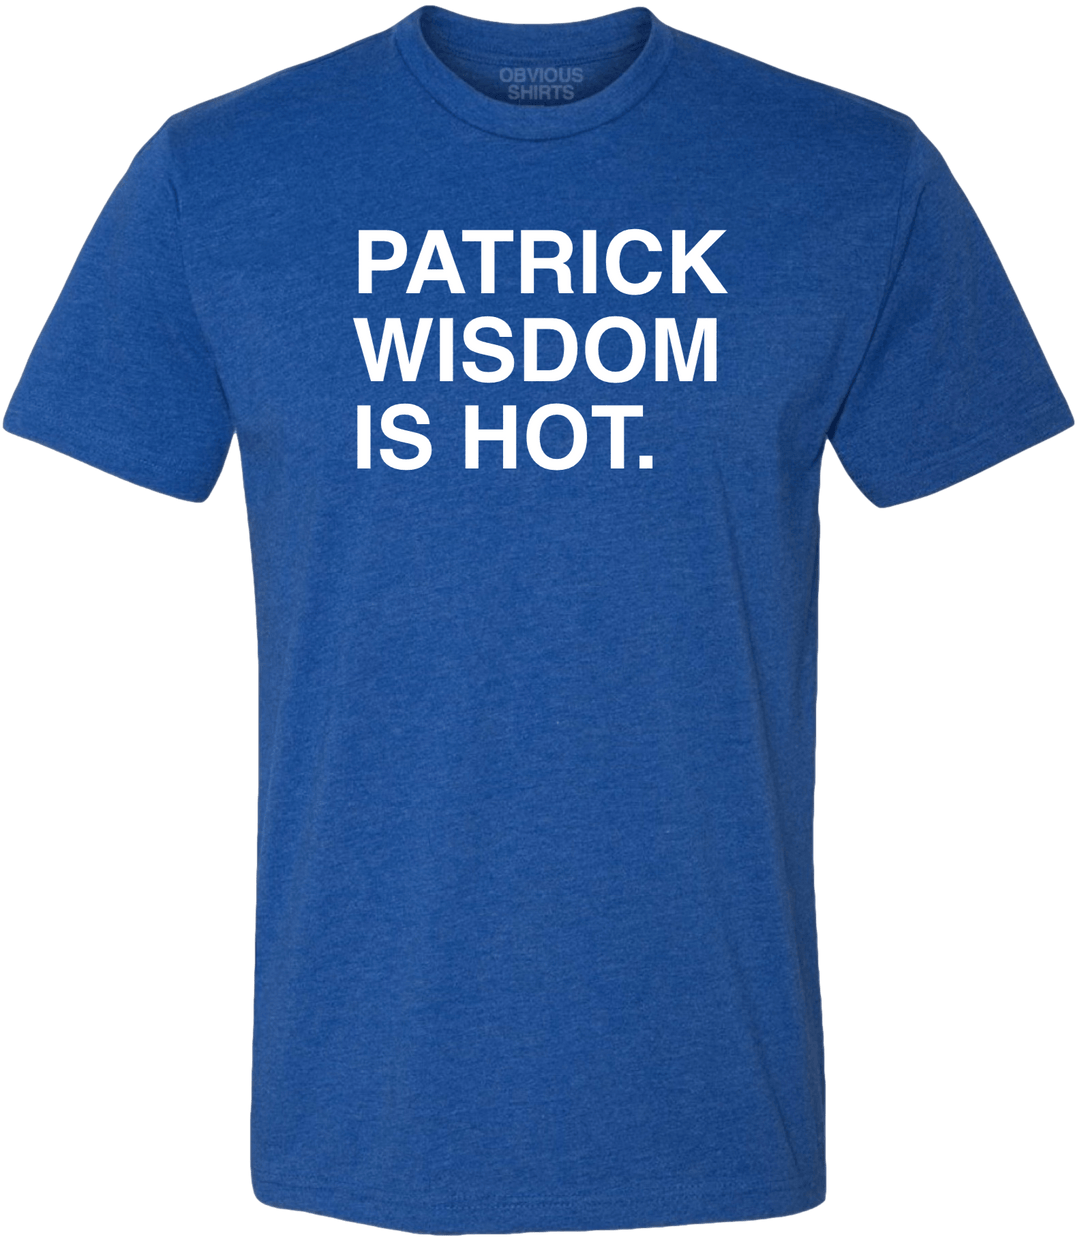 PATRICK WISDOM IS HOT. - OBVIOUS SHIRTS